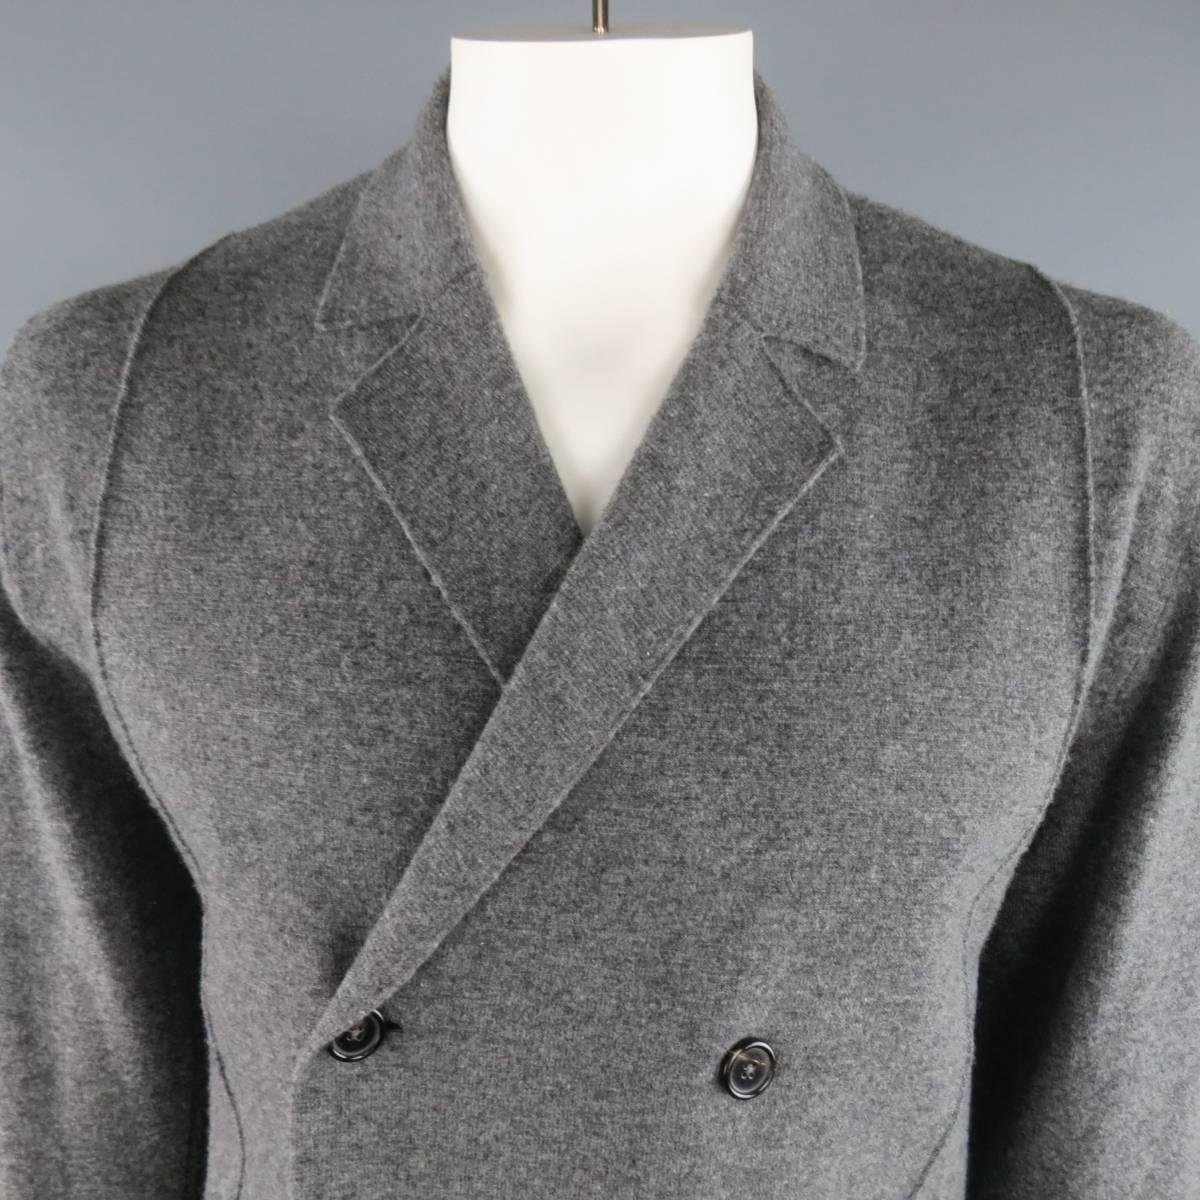 JIL SANDER cardigan comes in a heather gray wool blend knit and features a double breasted sport coat construction with a notch lapel, Tags removed. As-Is.
 
Good Pre-Owned Condition.
 
Measurements:
 
Shoulder: 21 in.
Chest: 48 in.
Sleeve: 28.5